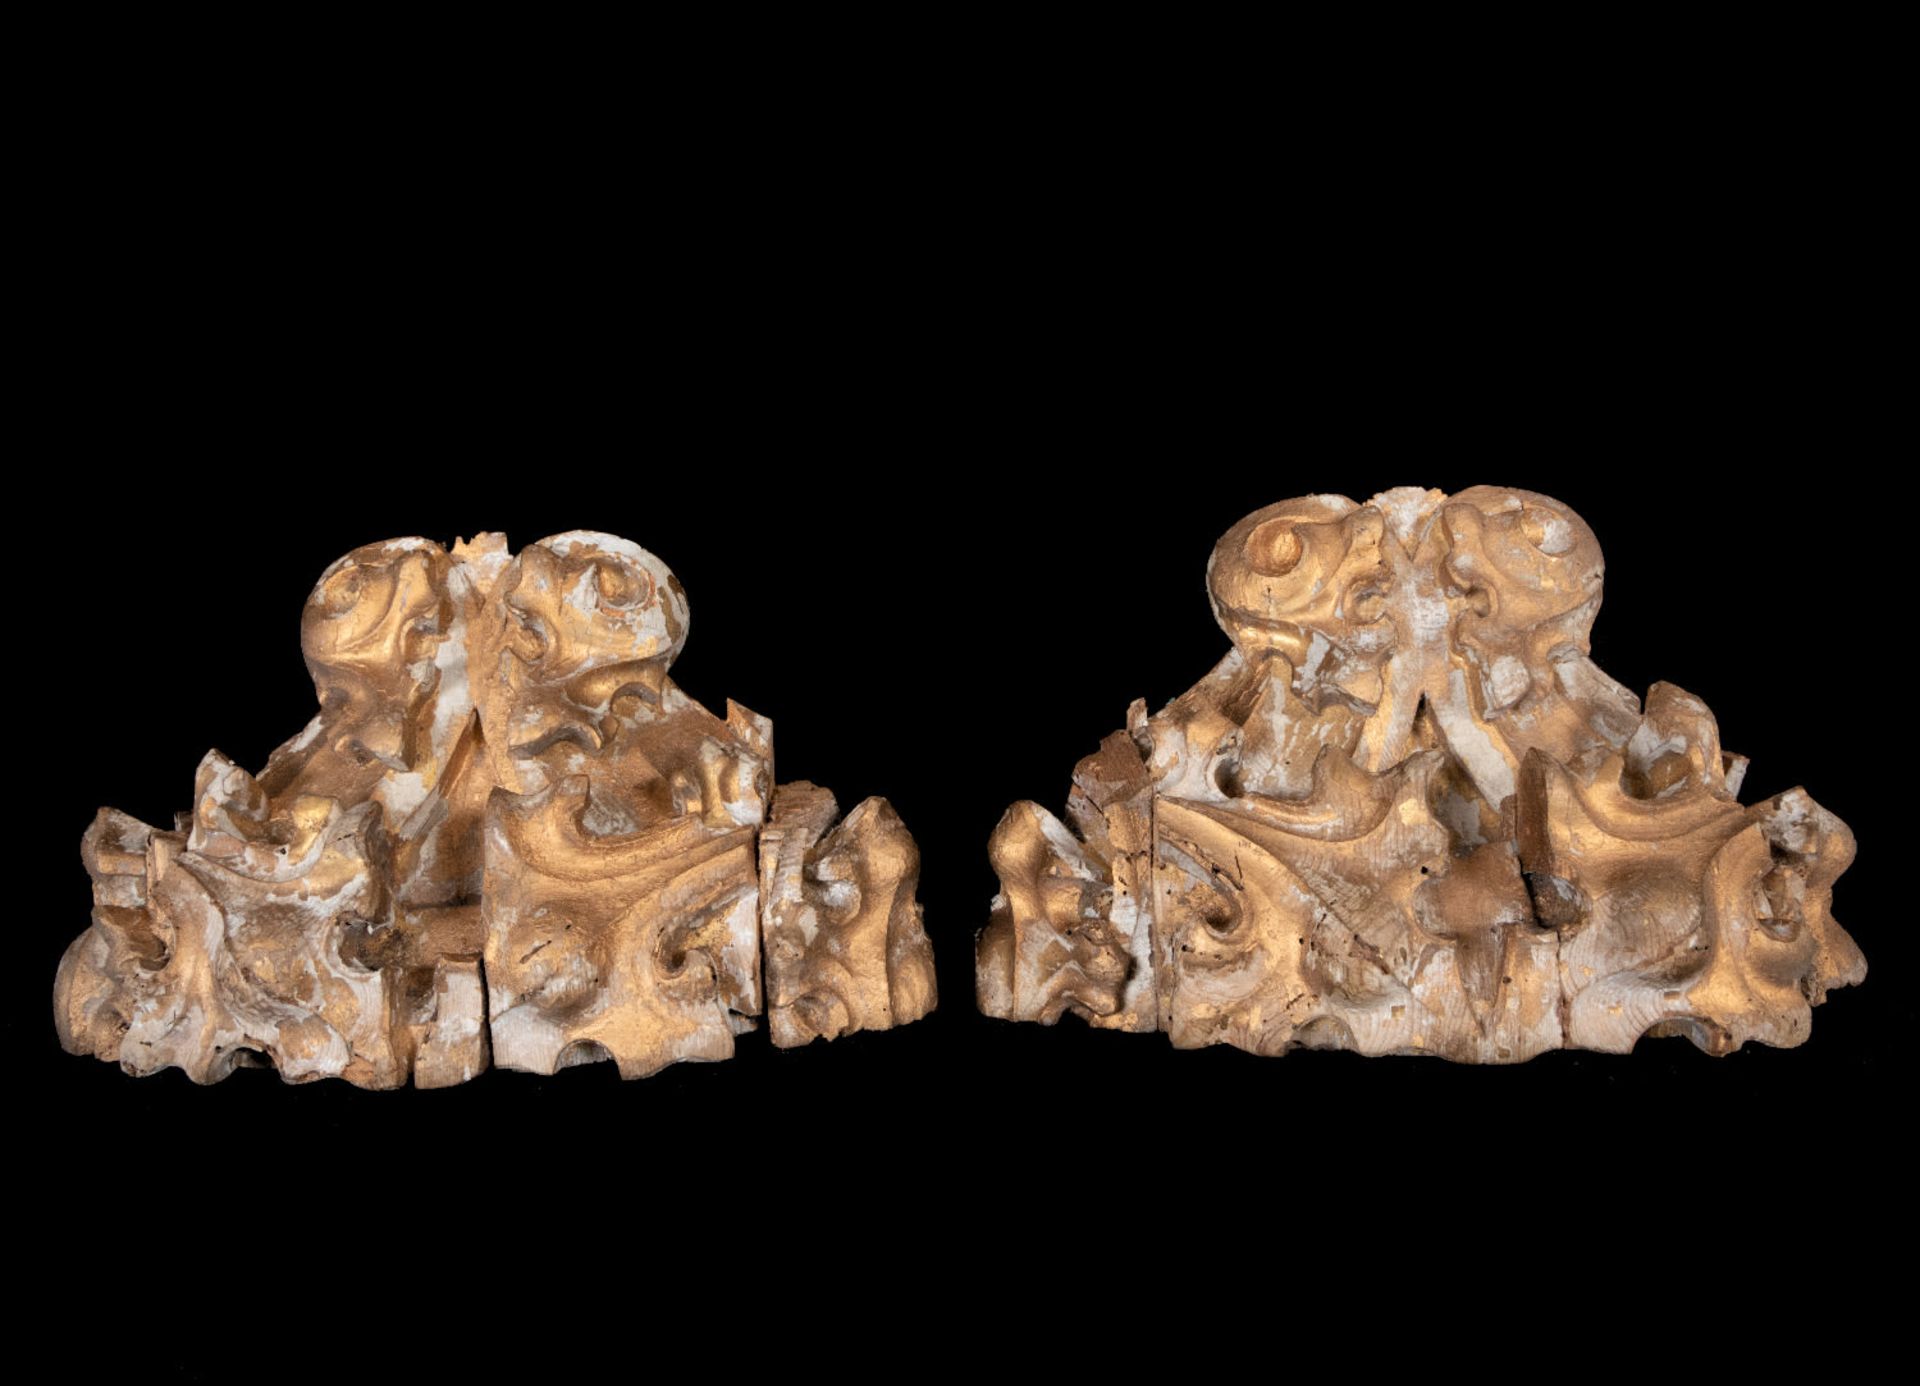 Pair of German or Austrian Rococo corbels from the 18th century - Image 6 of 7